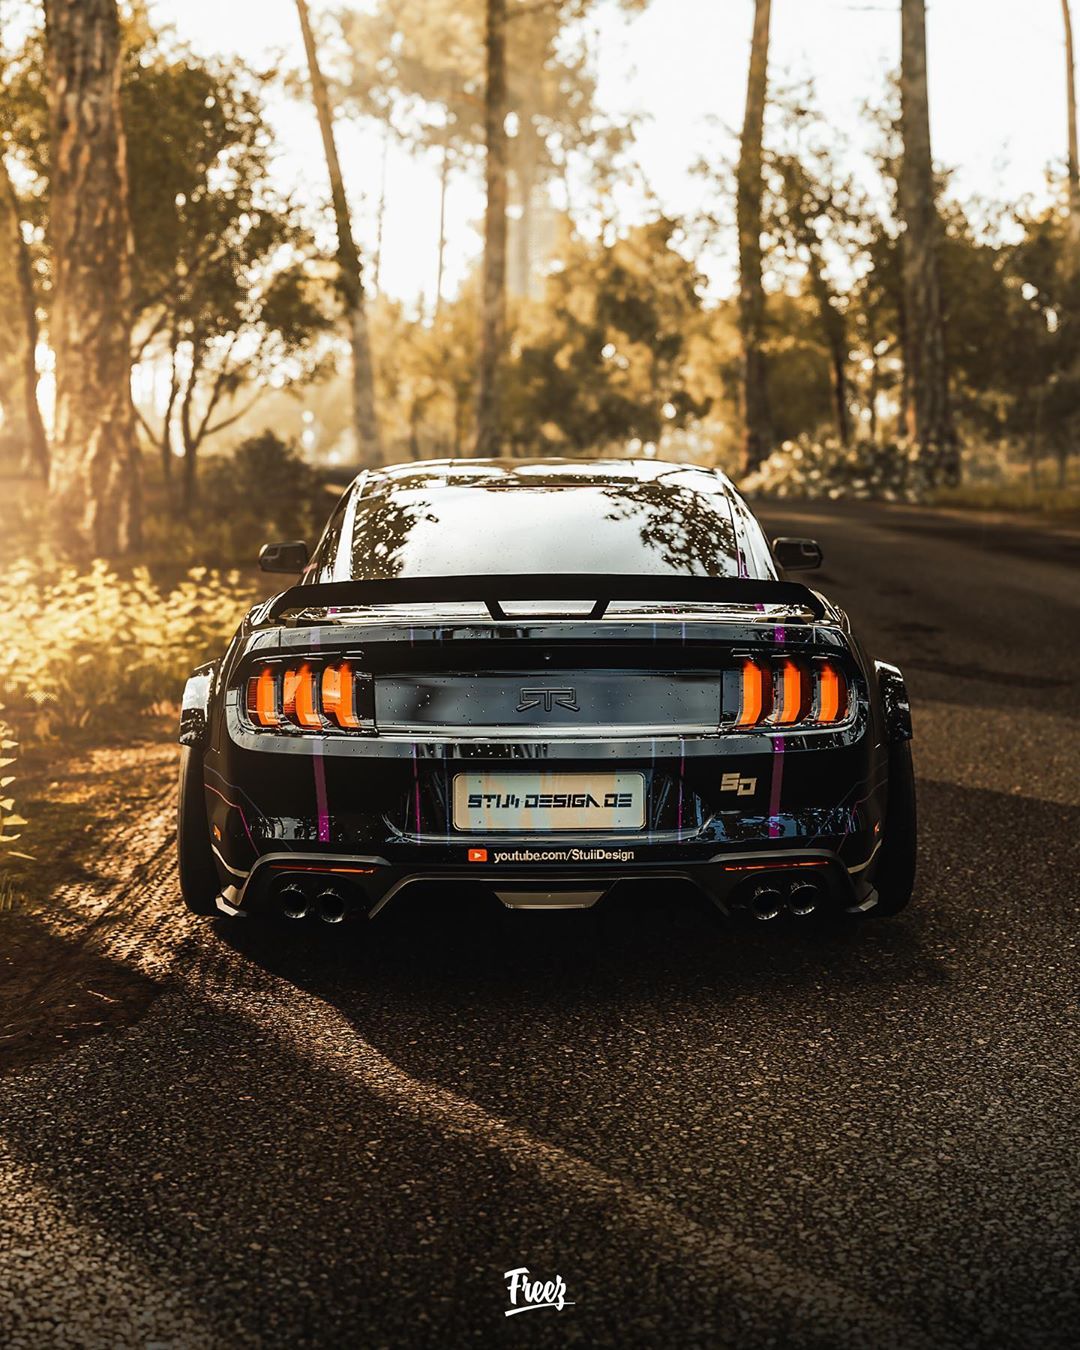 Widebody Mustang RTR Looks Like a Tuner's Dream